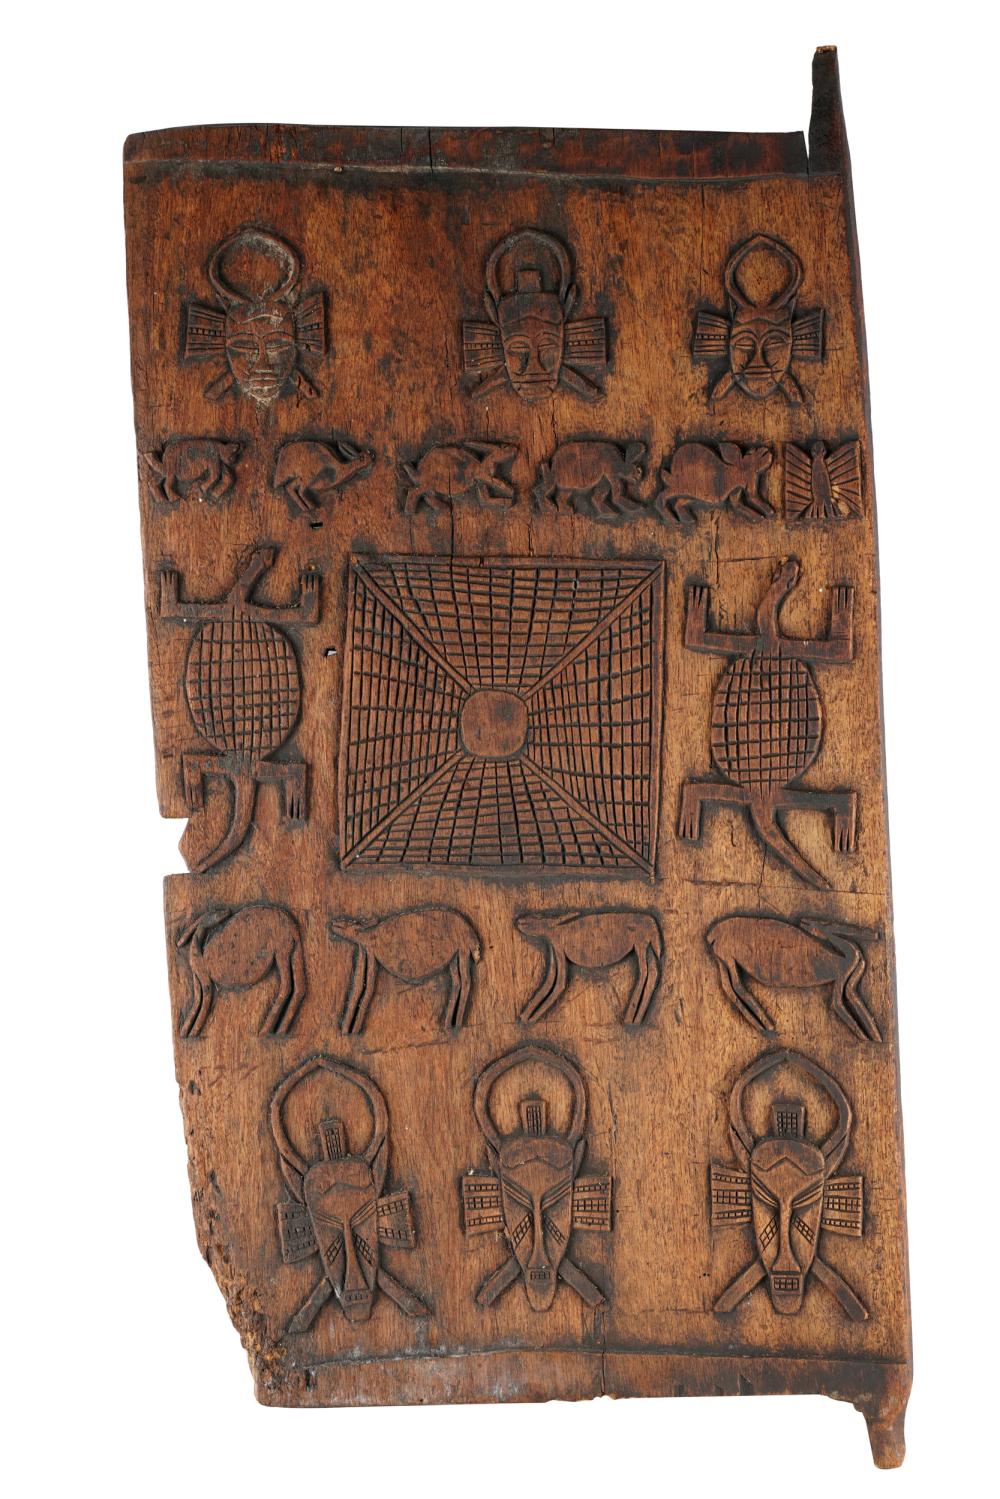 TRIBAL RELIEF CARVED WOOD PANEL 333975